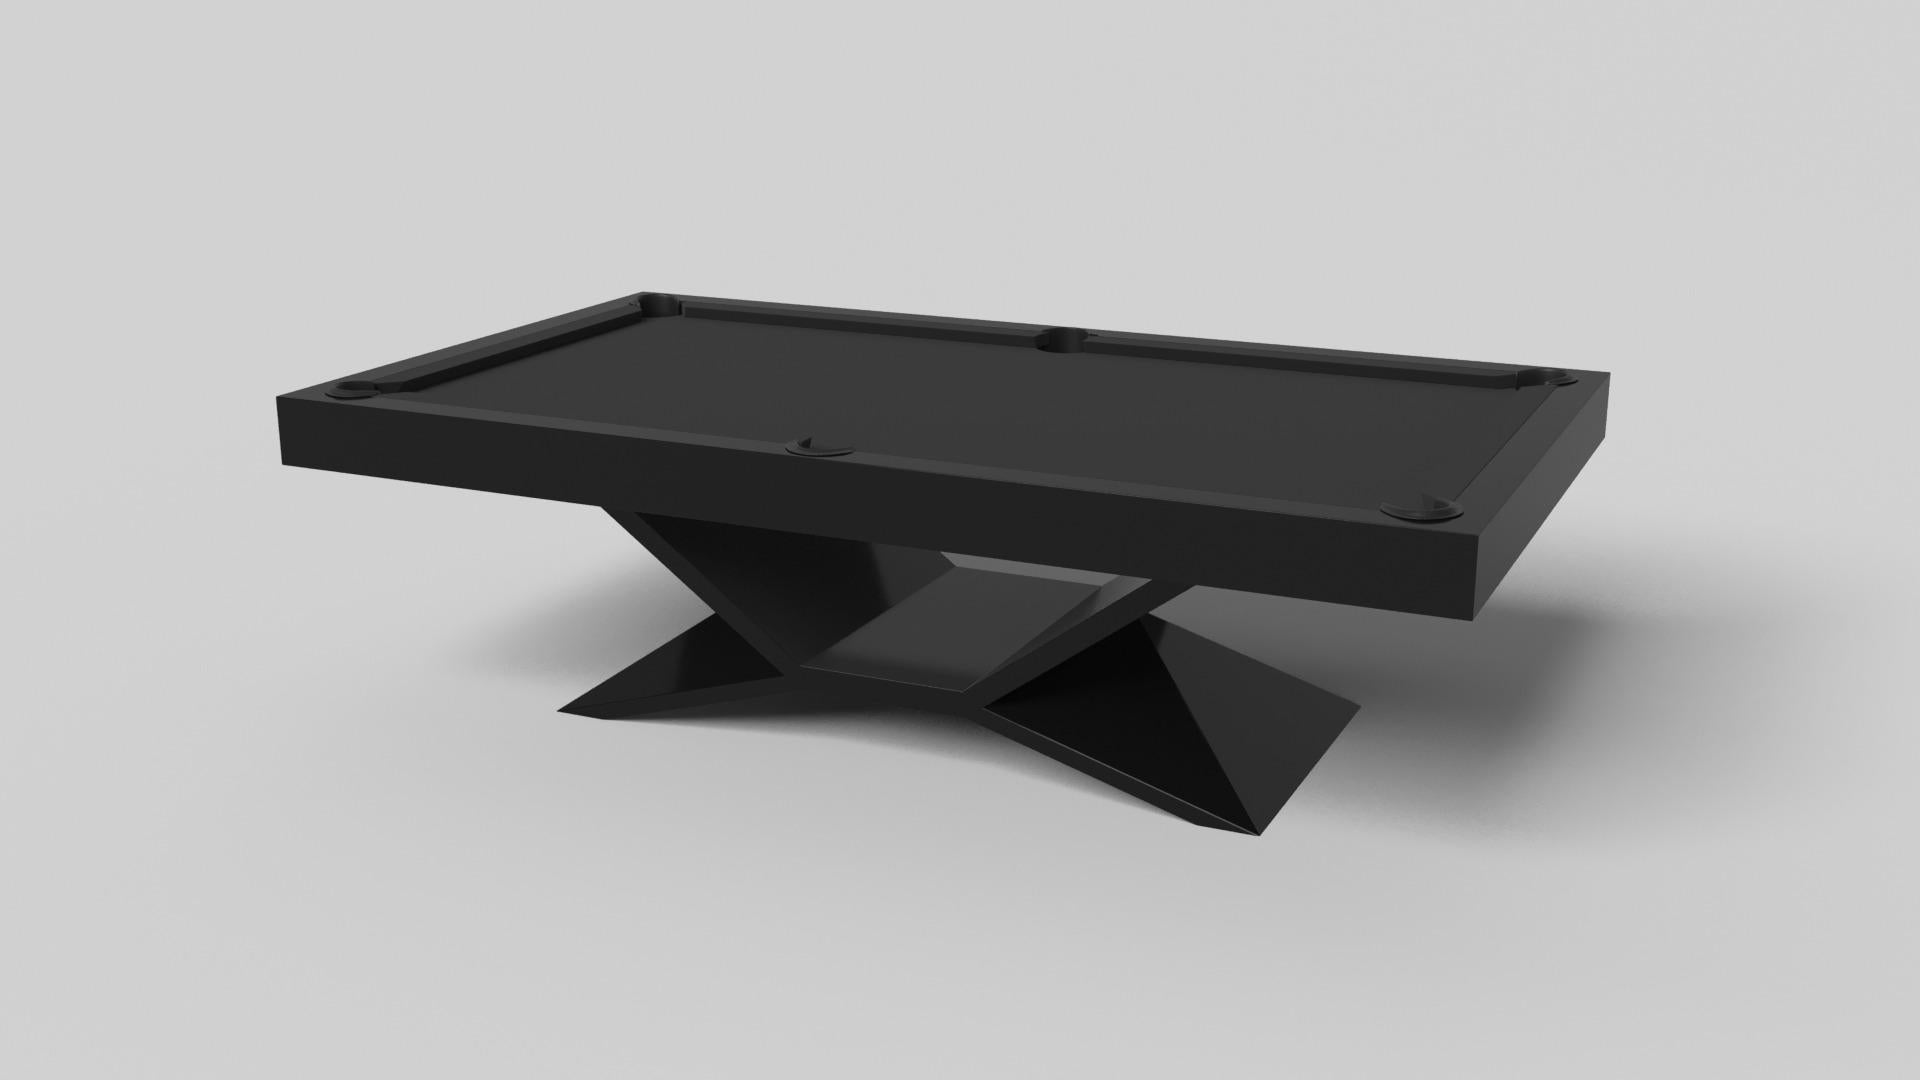 In chrome, the Kors pool table is a superior example of contrasting geometric forms. This table features an angular base that highlights the beauty of negative space from the front view. From the side view, it offers a completely different